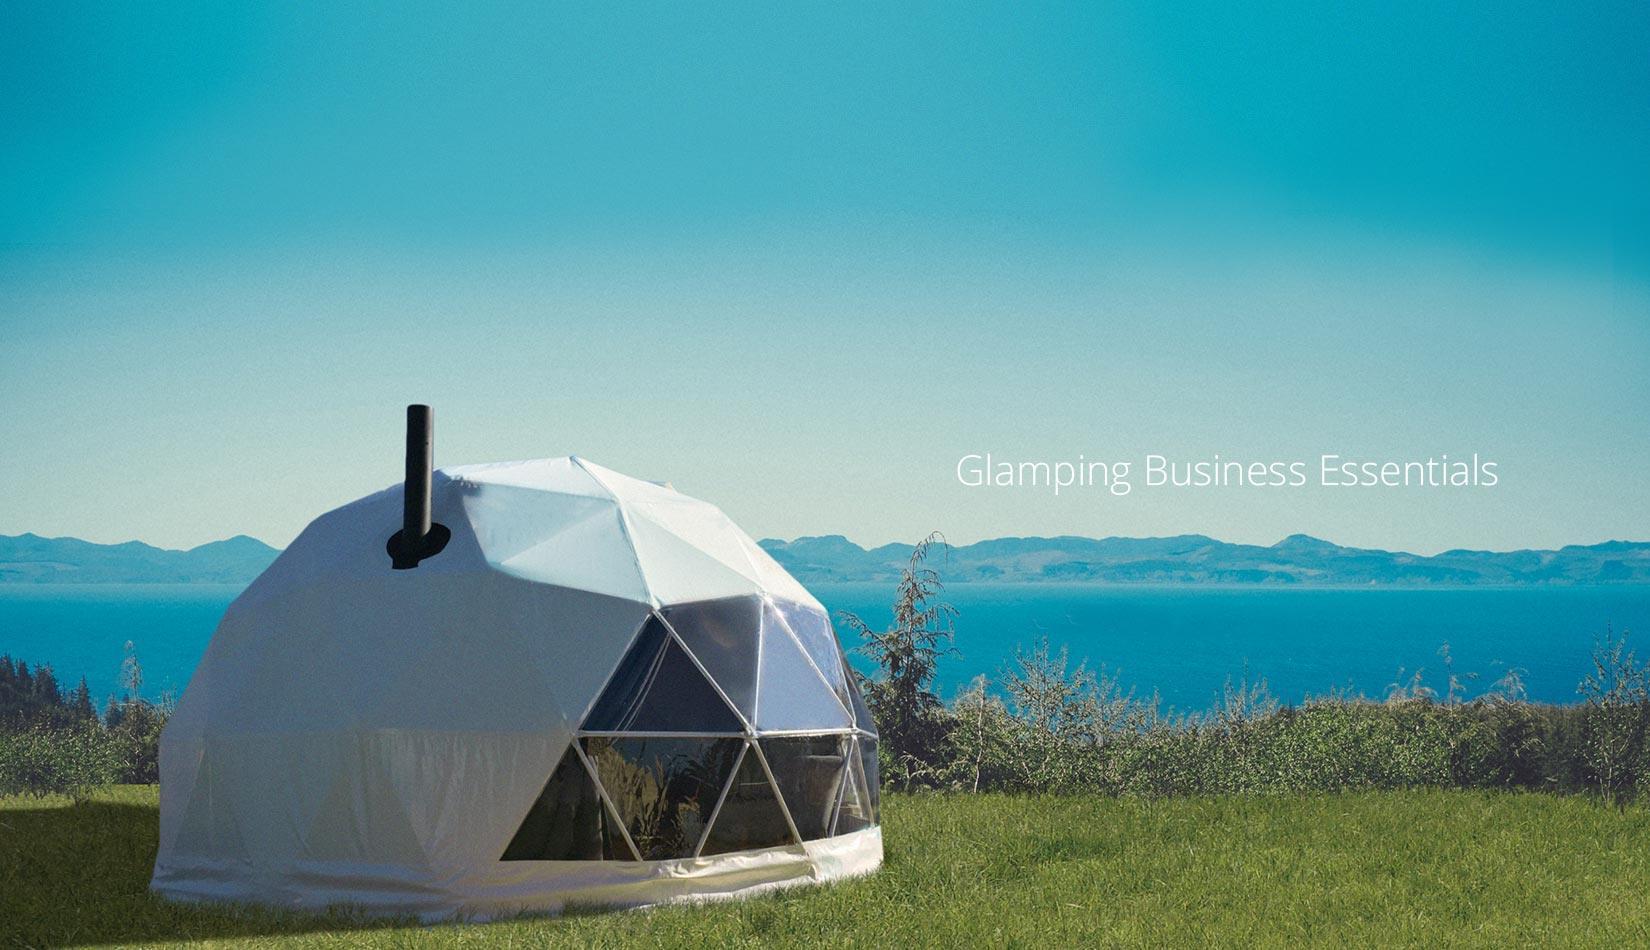 graphic with white geodesic dome and text "clamping business essentials"